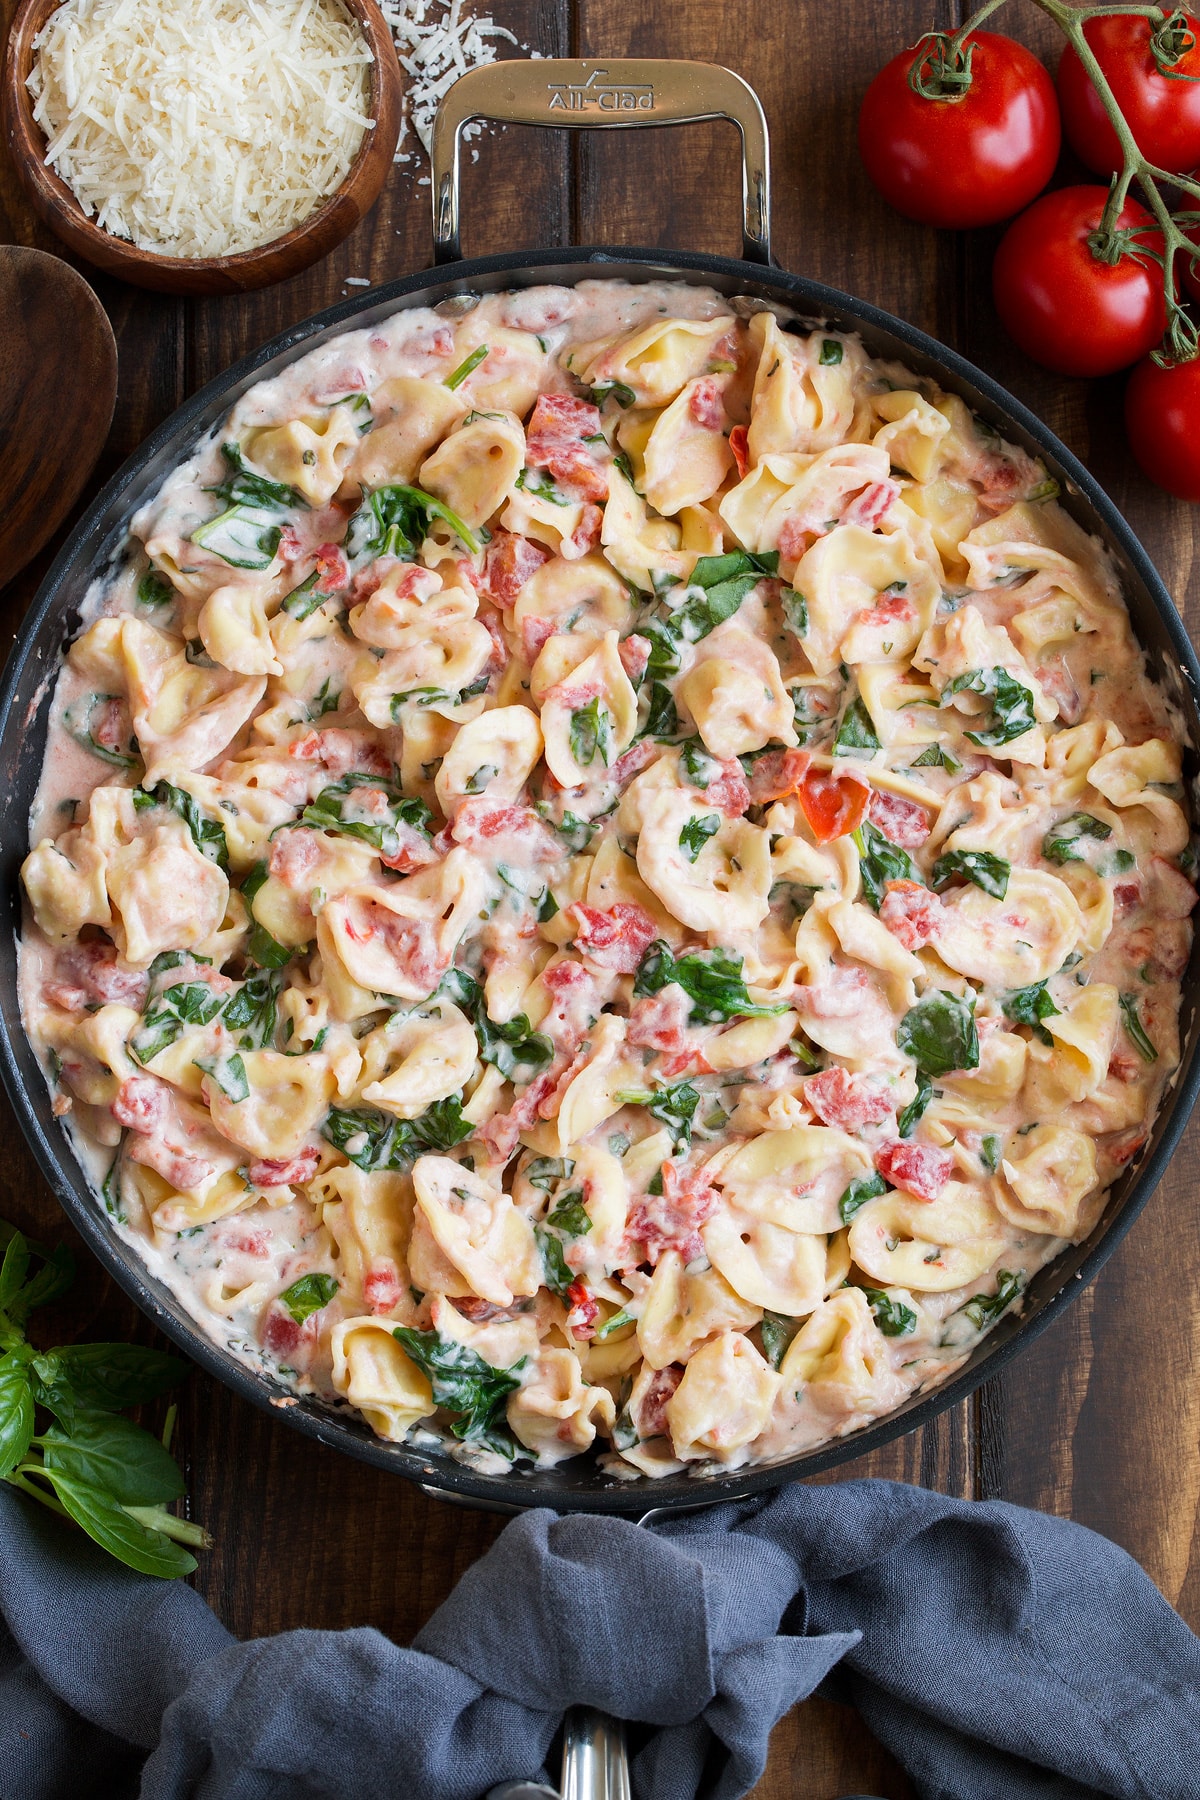 Creamy Spinach Tomato Tortellini shown in a large skillet.